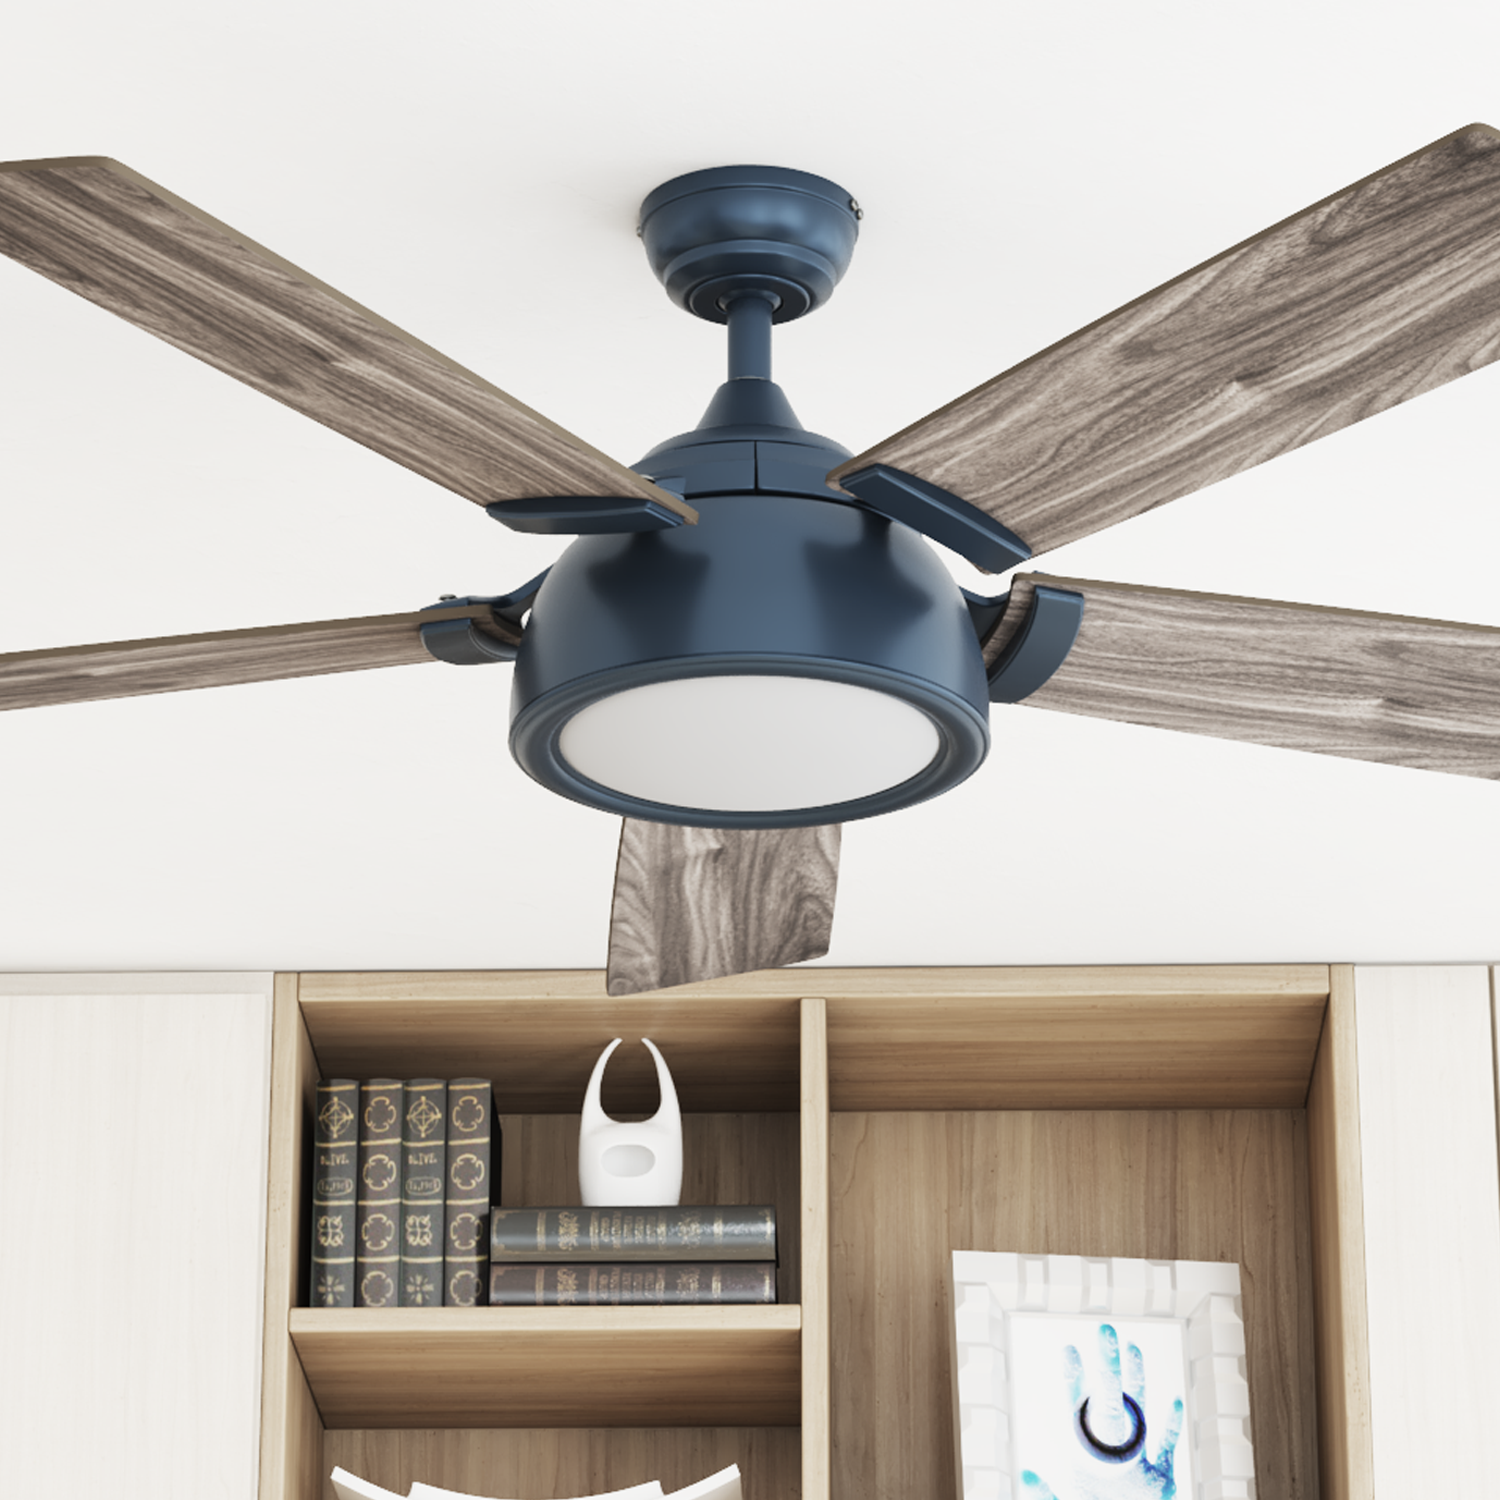 Wayfair | Ceiling Fans With Lights You'll Love in 2023